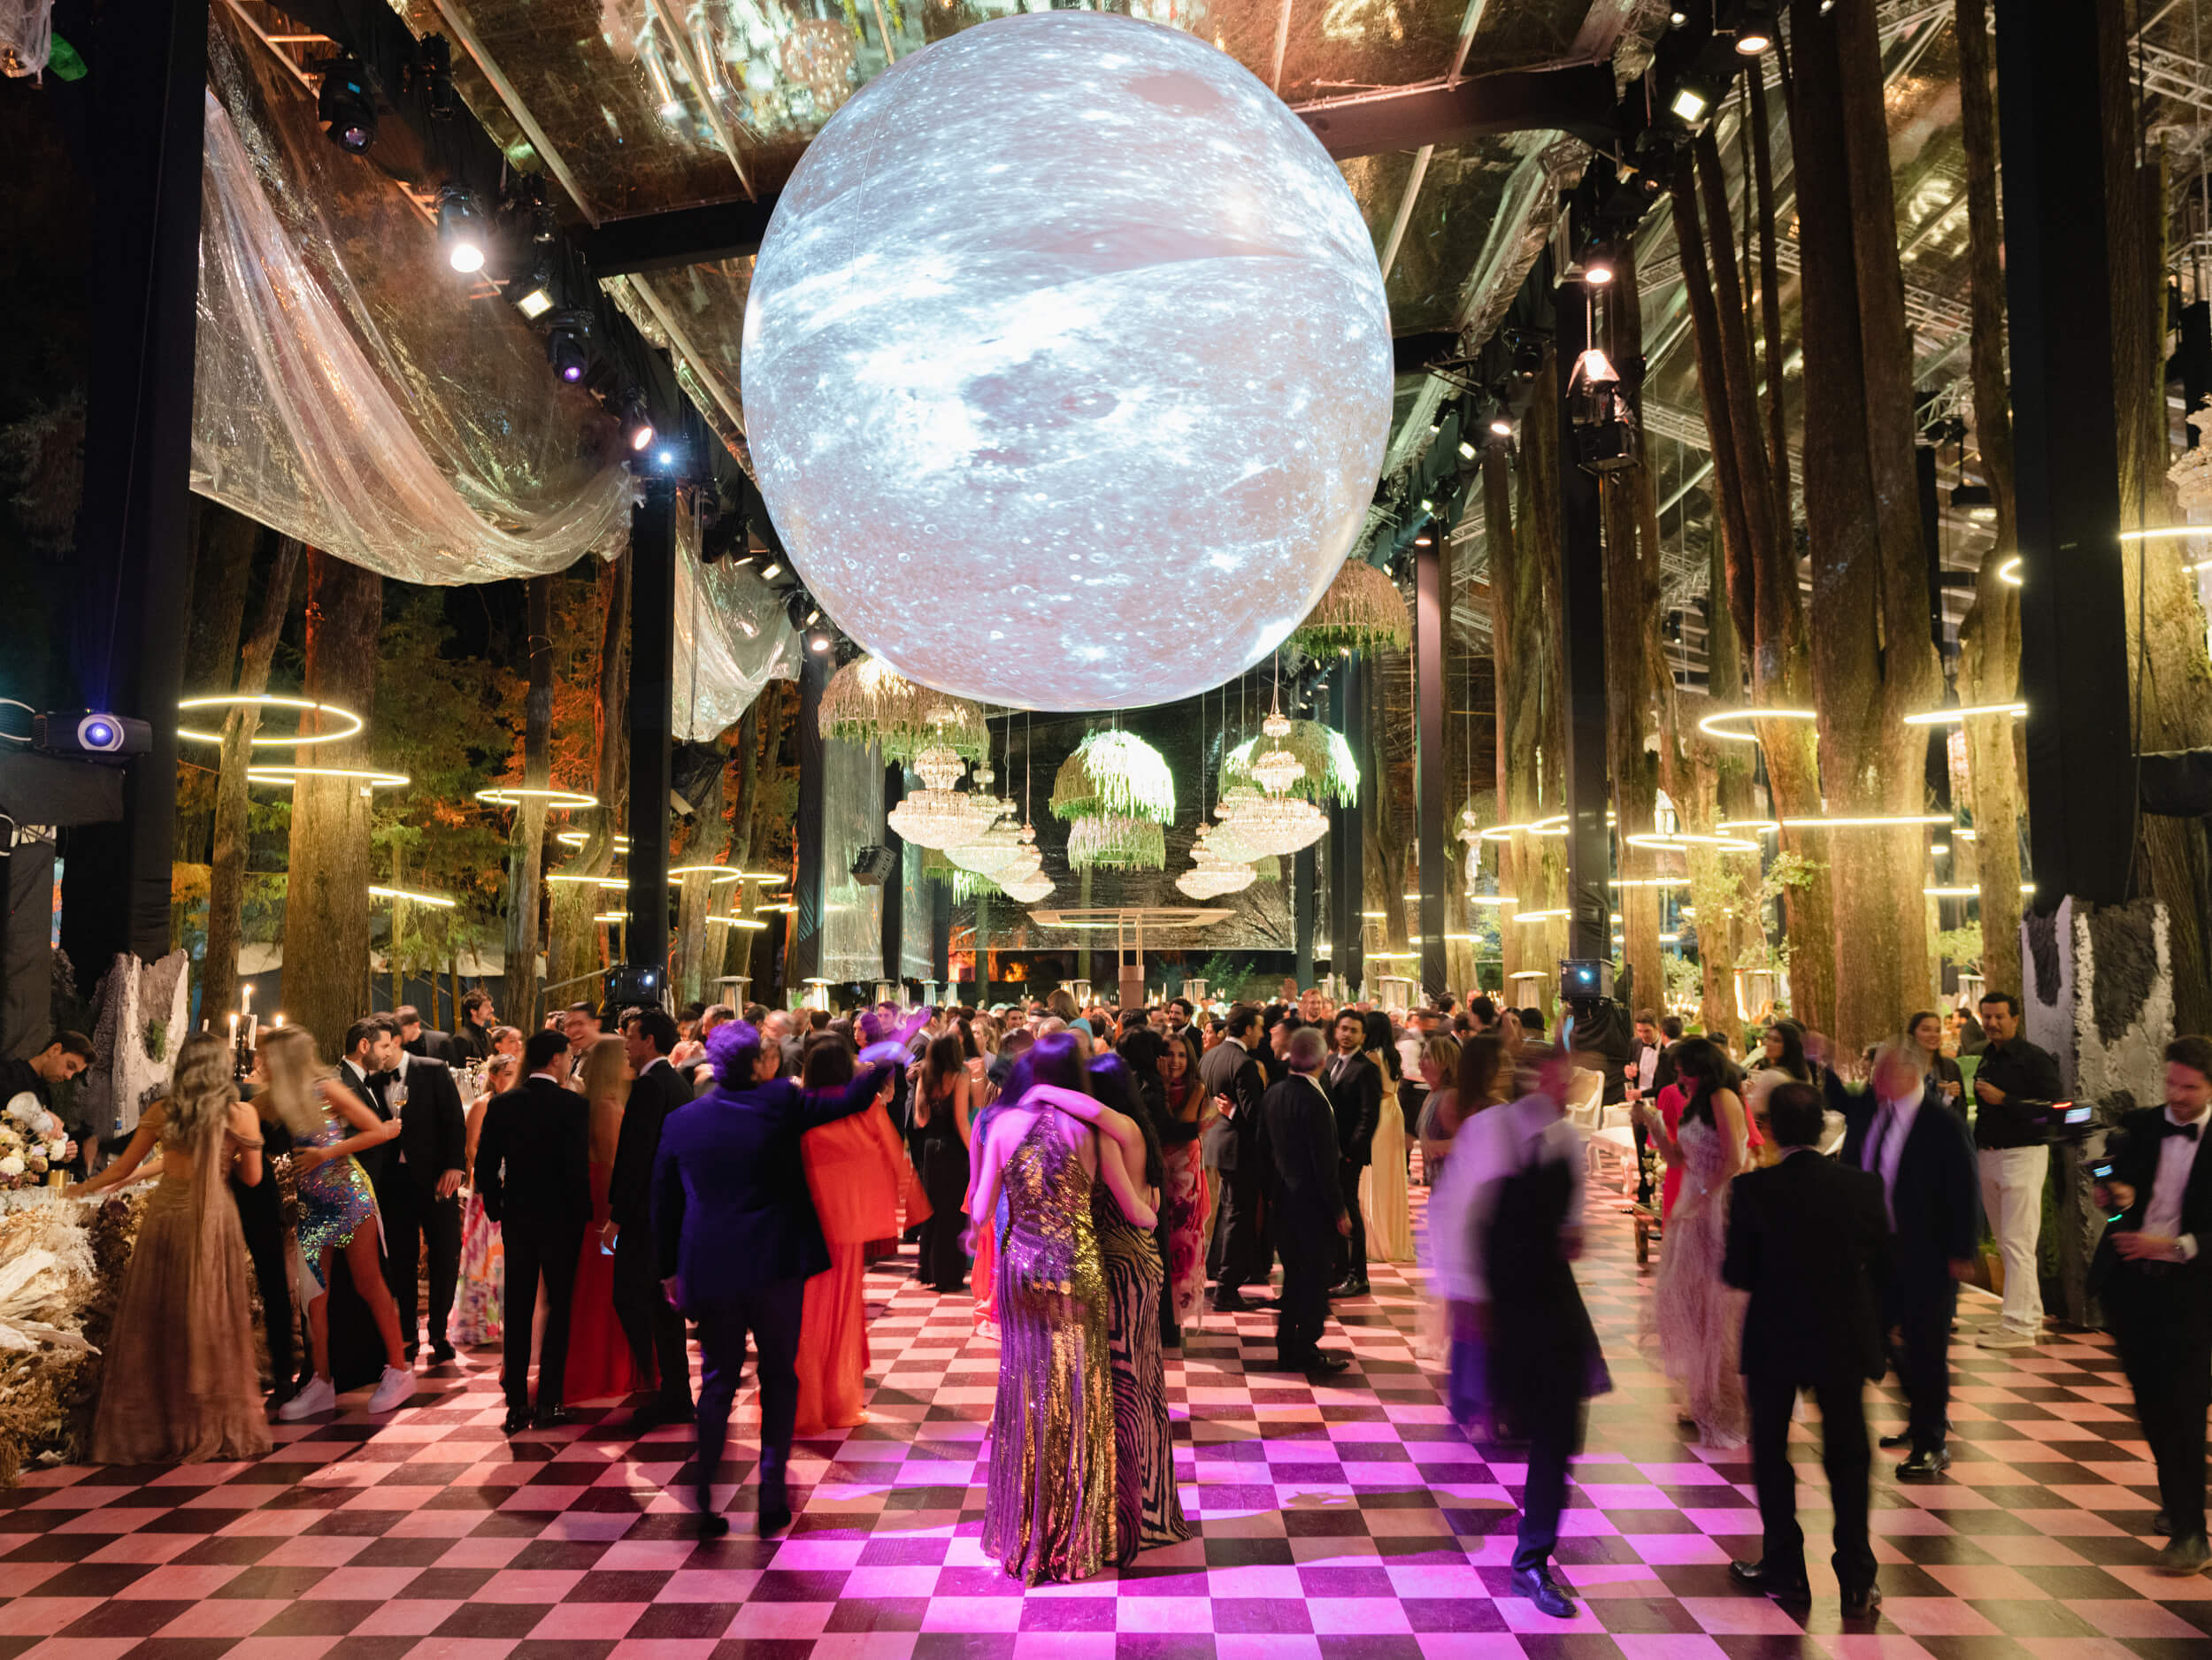 Guests celebrating under a man-made moon